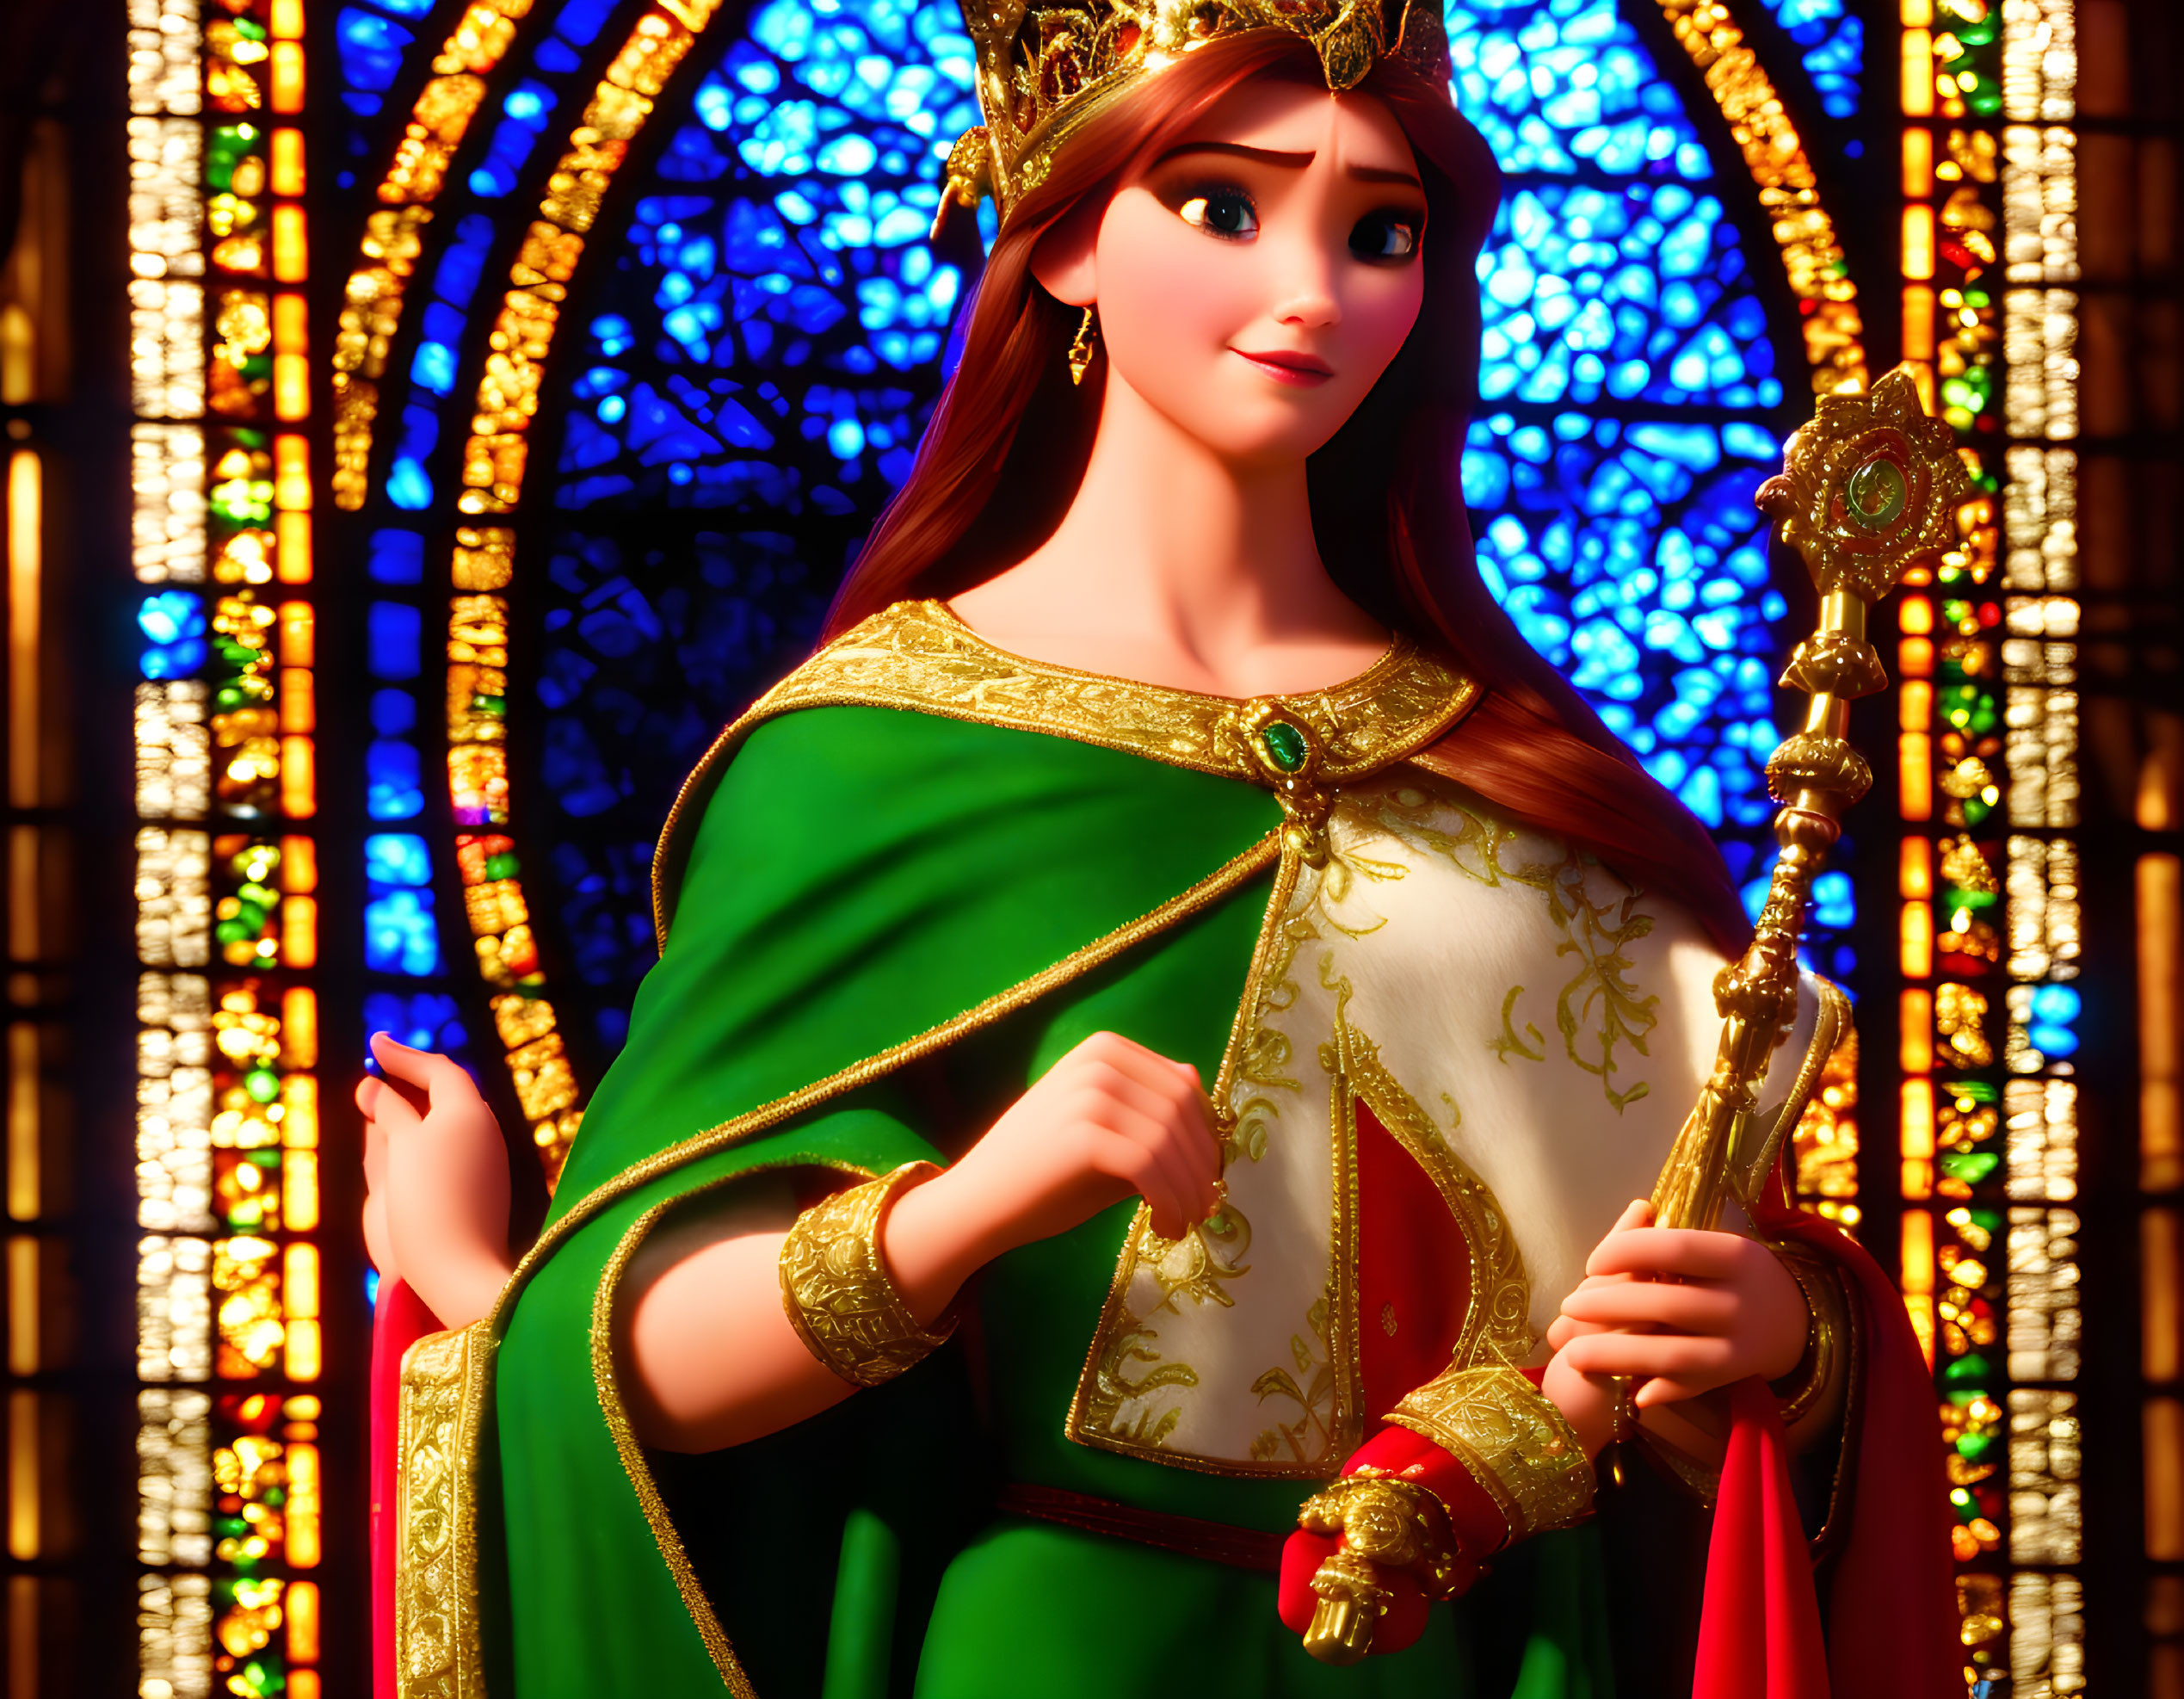 Animated queen with scepter in front of stained glass window wearing crown, cloak, and gown.